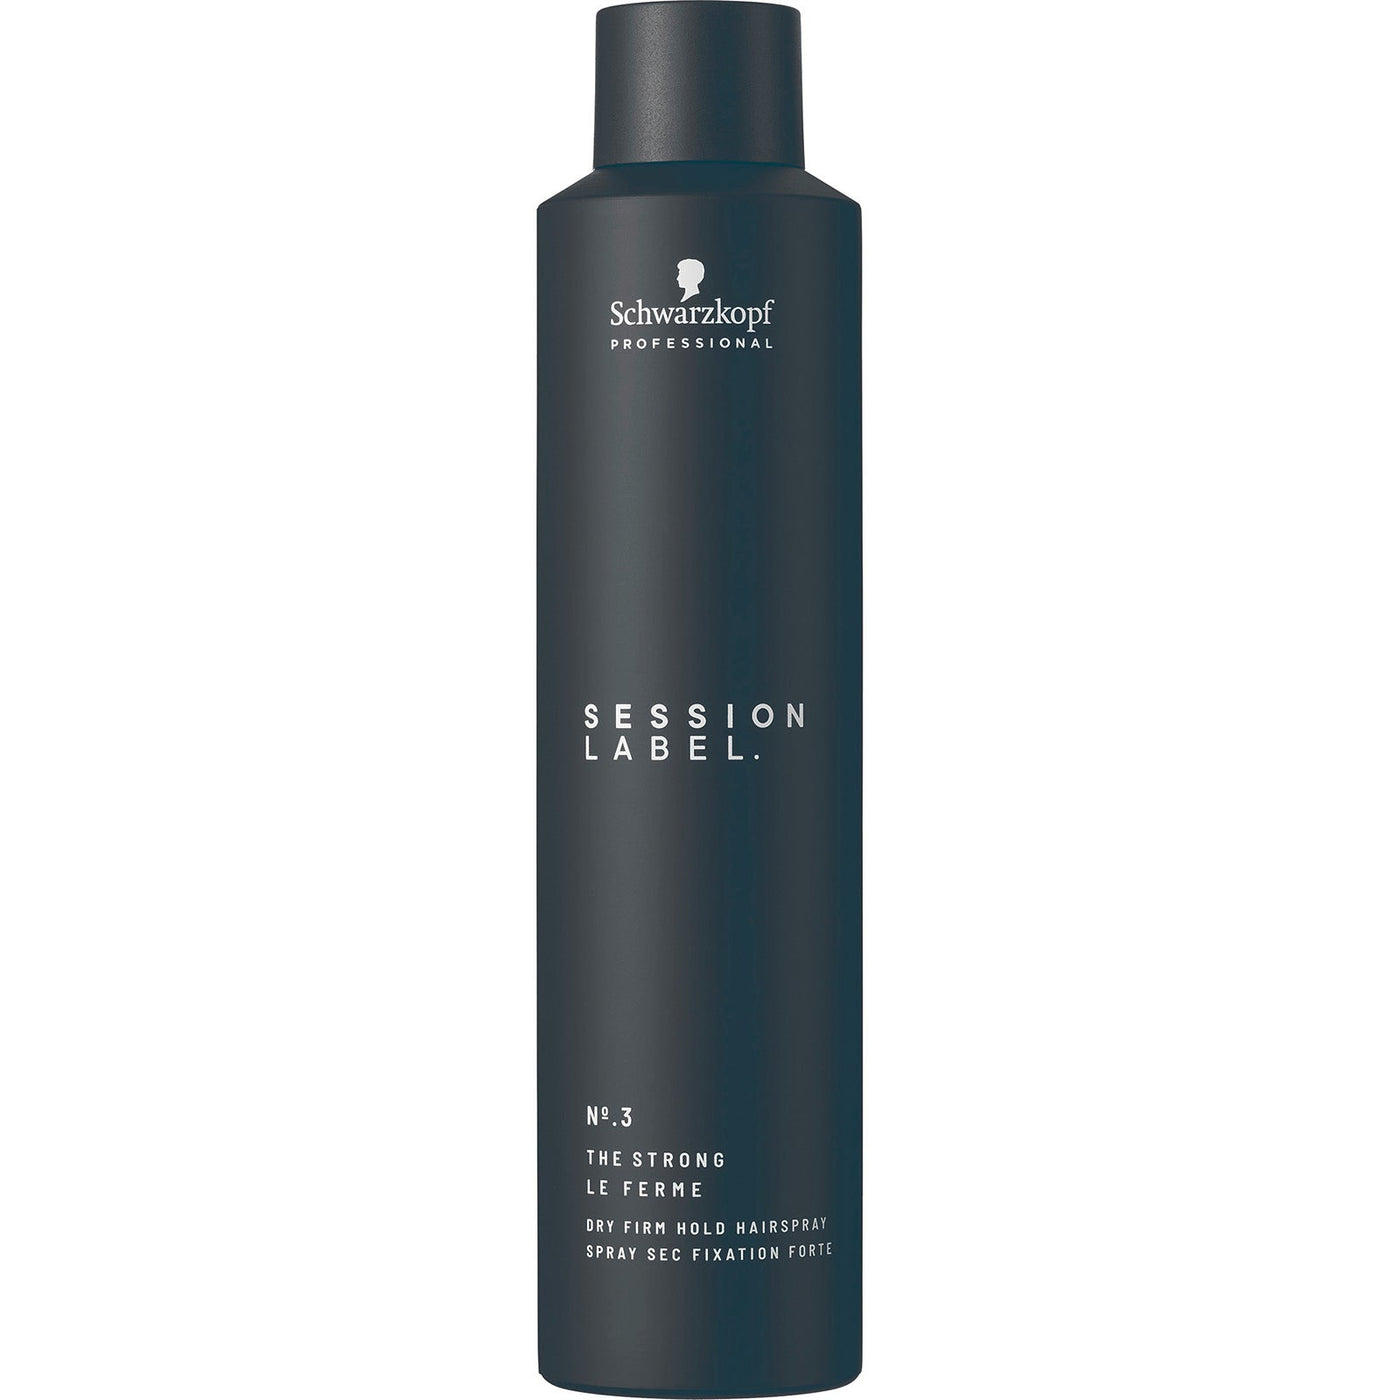 Schwarzkopf Professional Session Label The Strong (500ml)